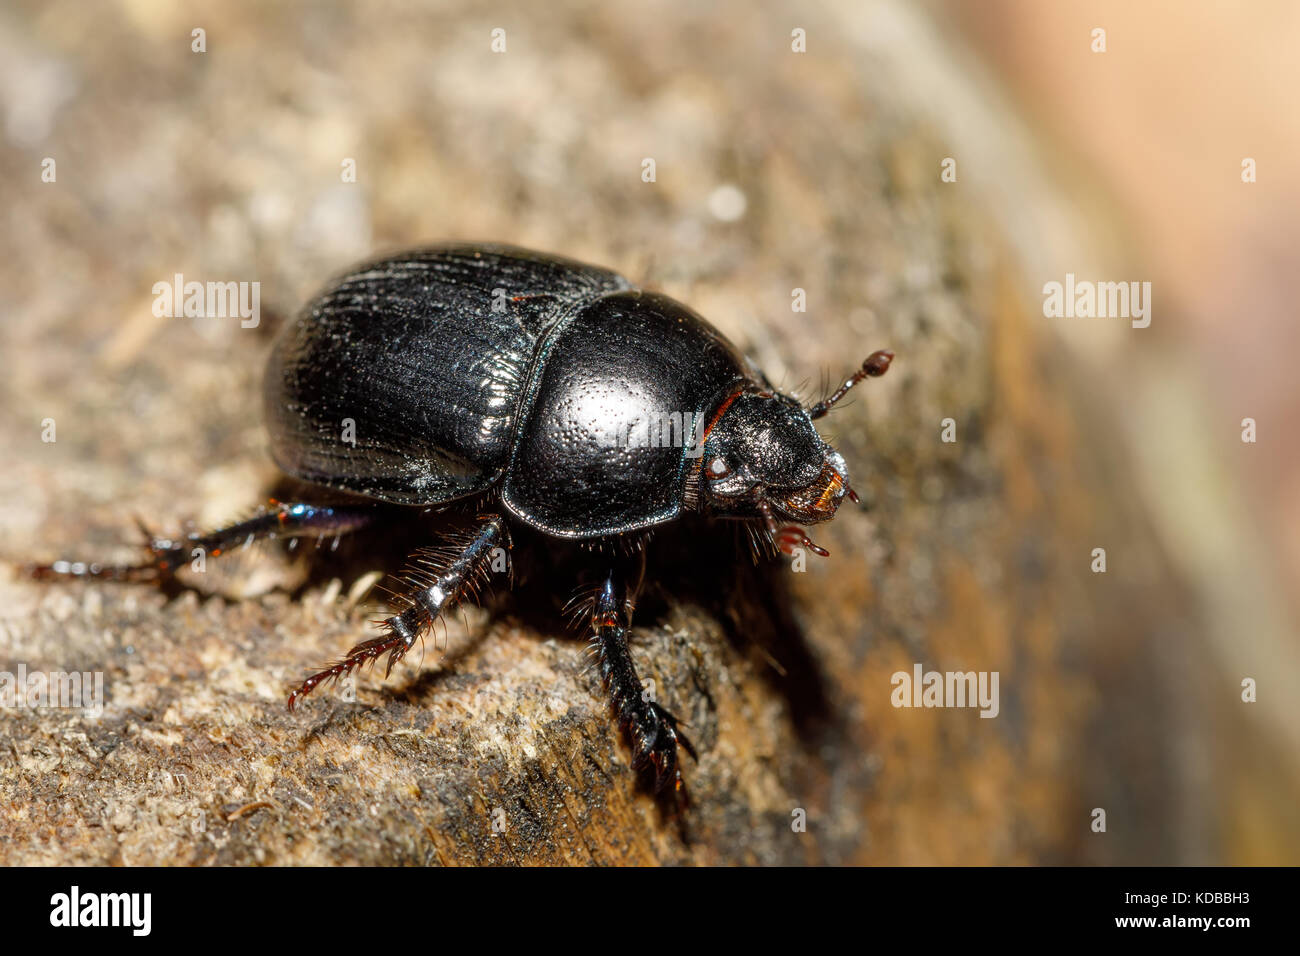 Black Earth-boring dung dor beetle, Anoprotrupes stercorosus, portrait on stump at pine forest, macro Stock Photo